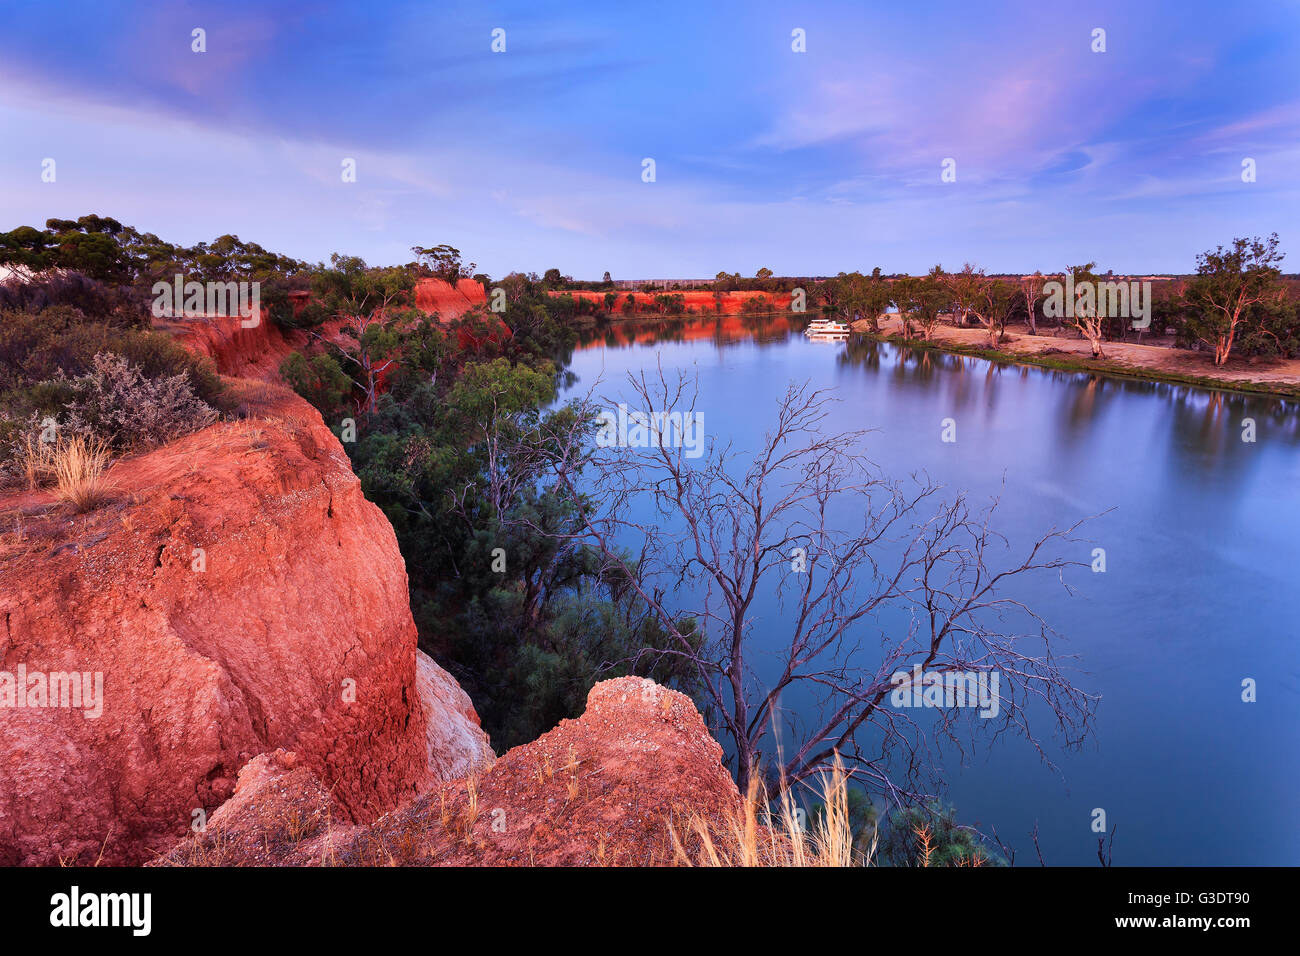 Red cliffs of Murray river on the border between Victoria and New South Wales states of Australia. Elevated red bank of the rive Stock Photo